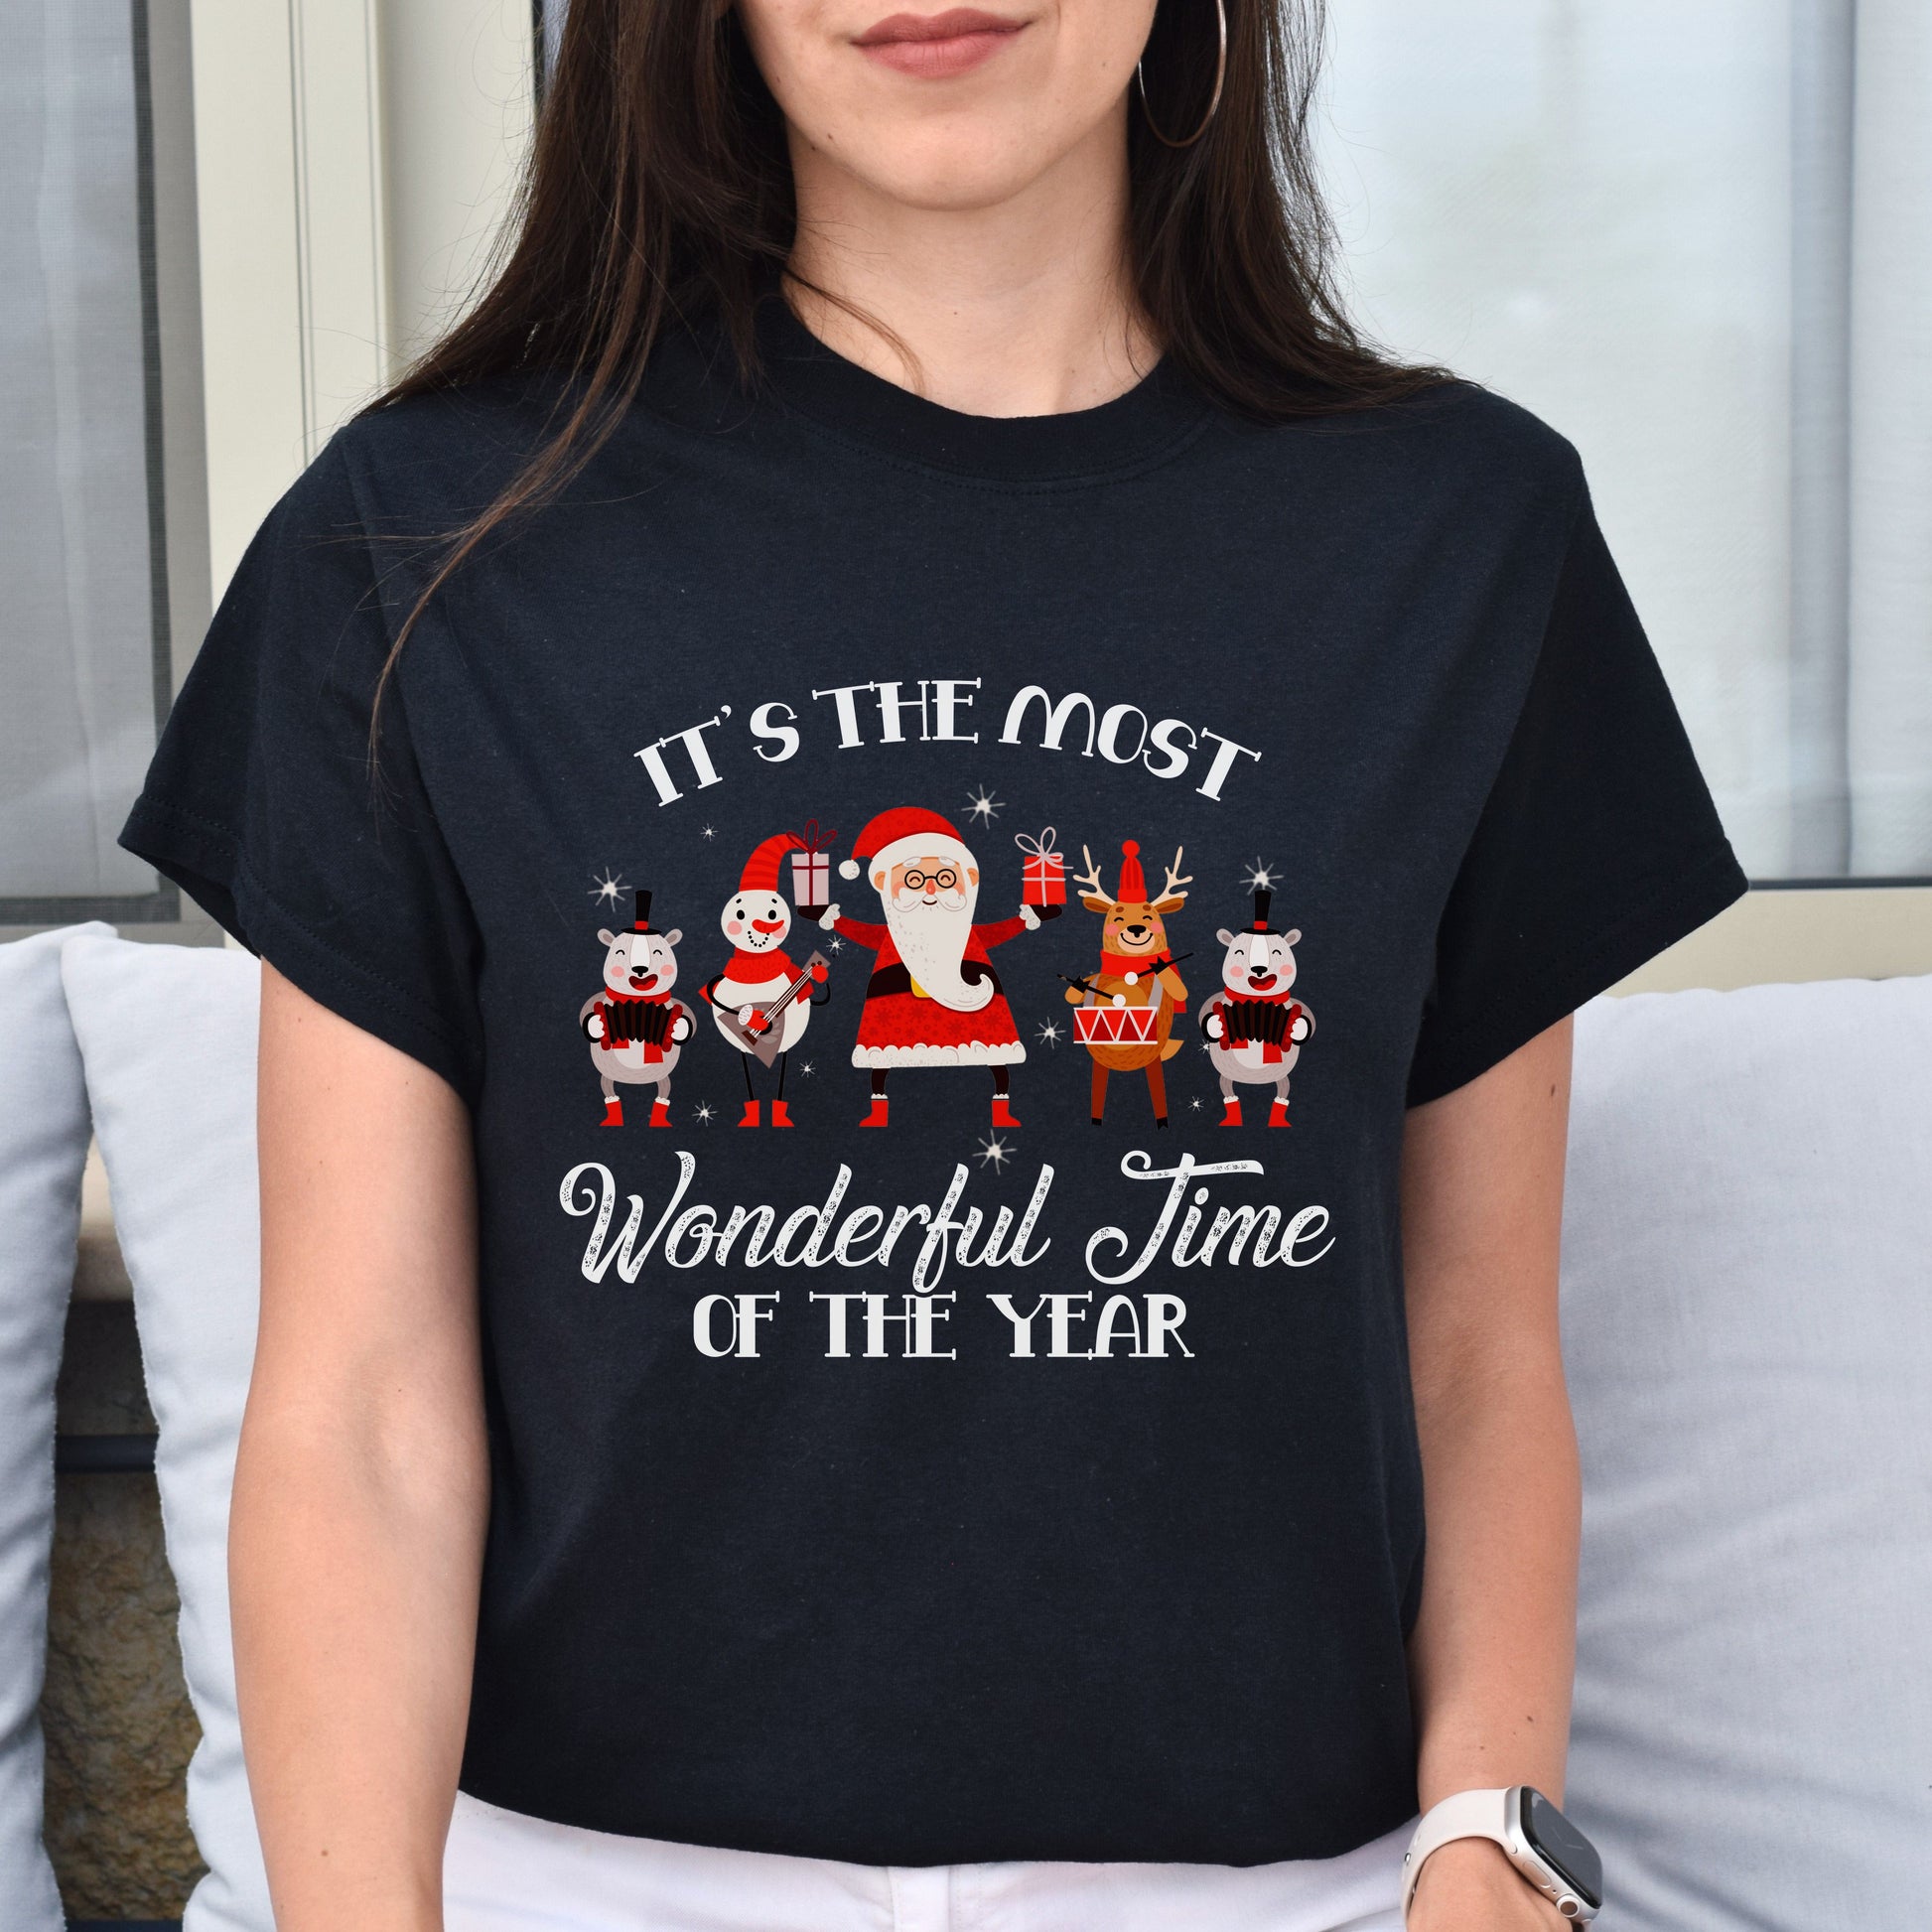 Christmas Unisex shirt Most wonderful time of the year Holiday tee Black Dark Heather-Black-Family-Gift-Planet